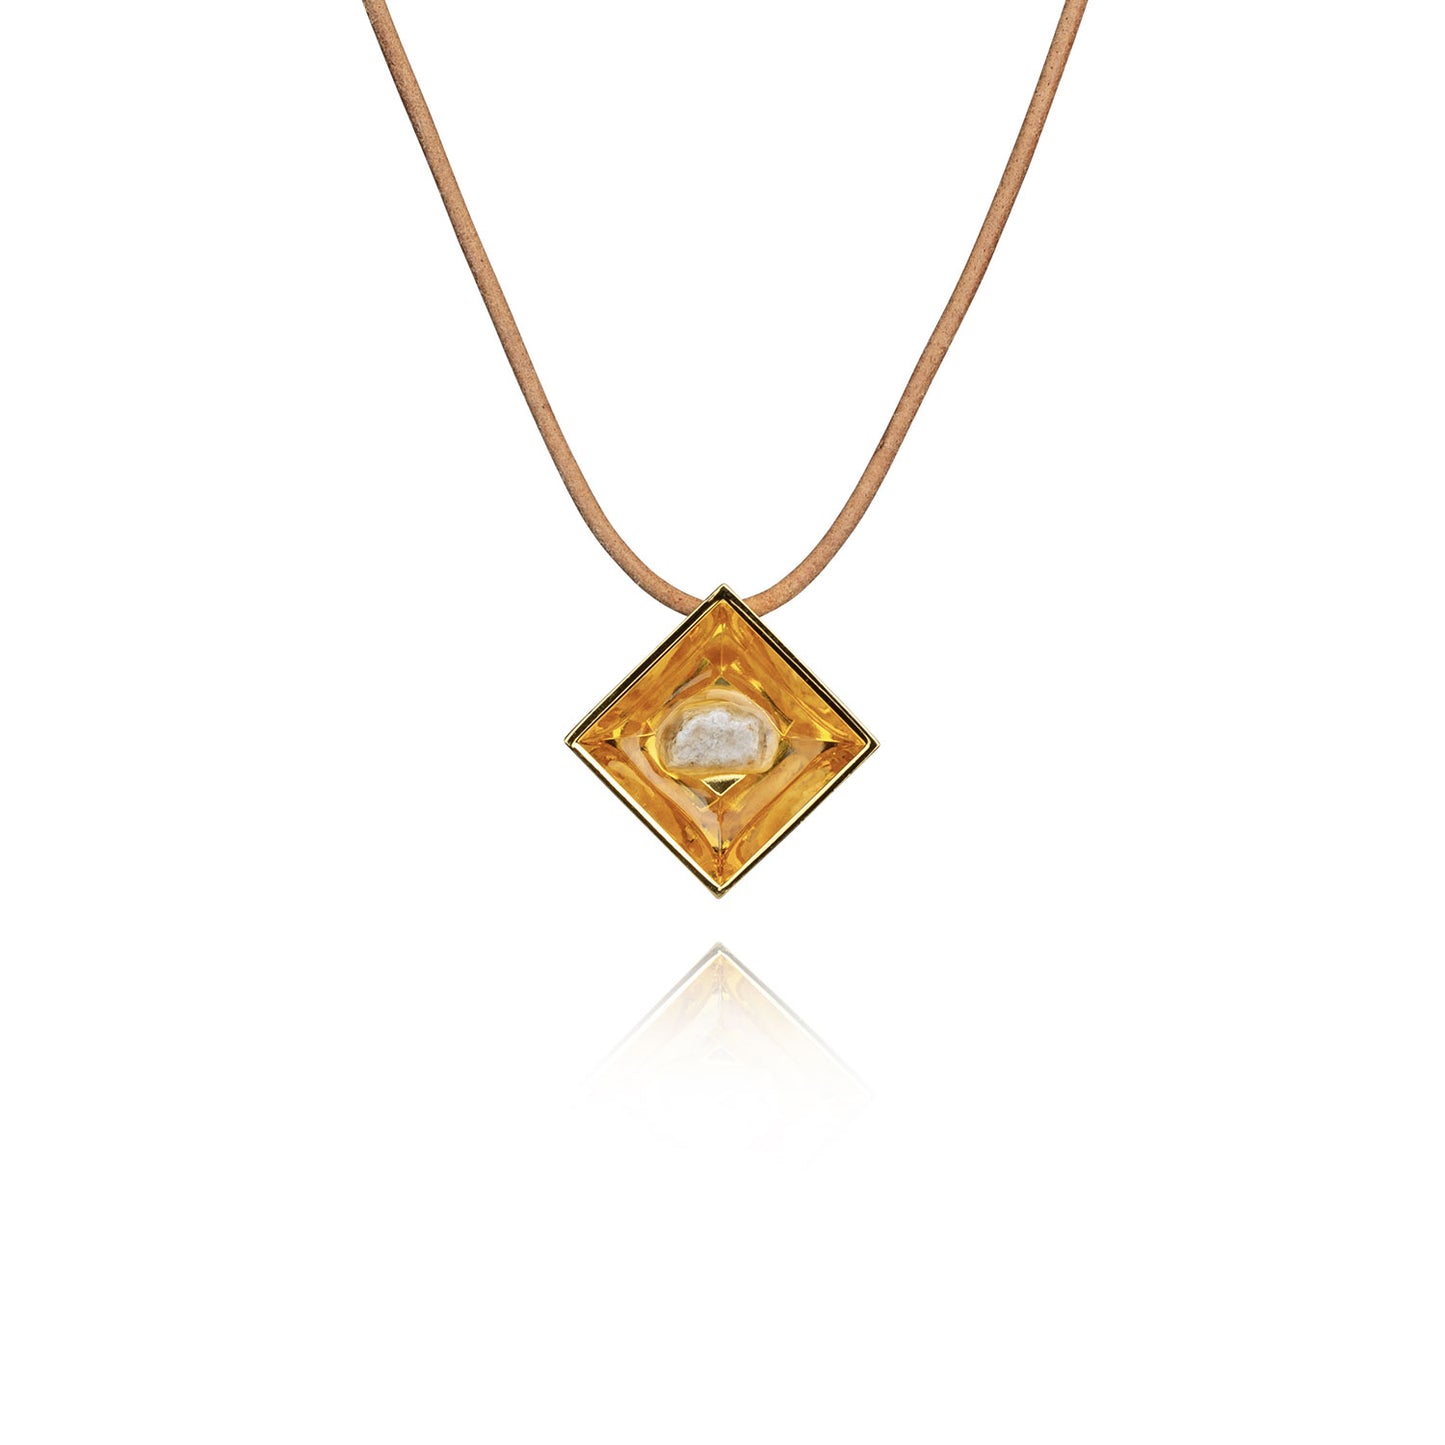 A small natural tan stone sitting in the middle of a diamond shaped metal pendant in a gold color. The pendant is hanging on a tan leather necklace.